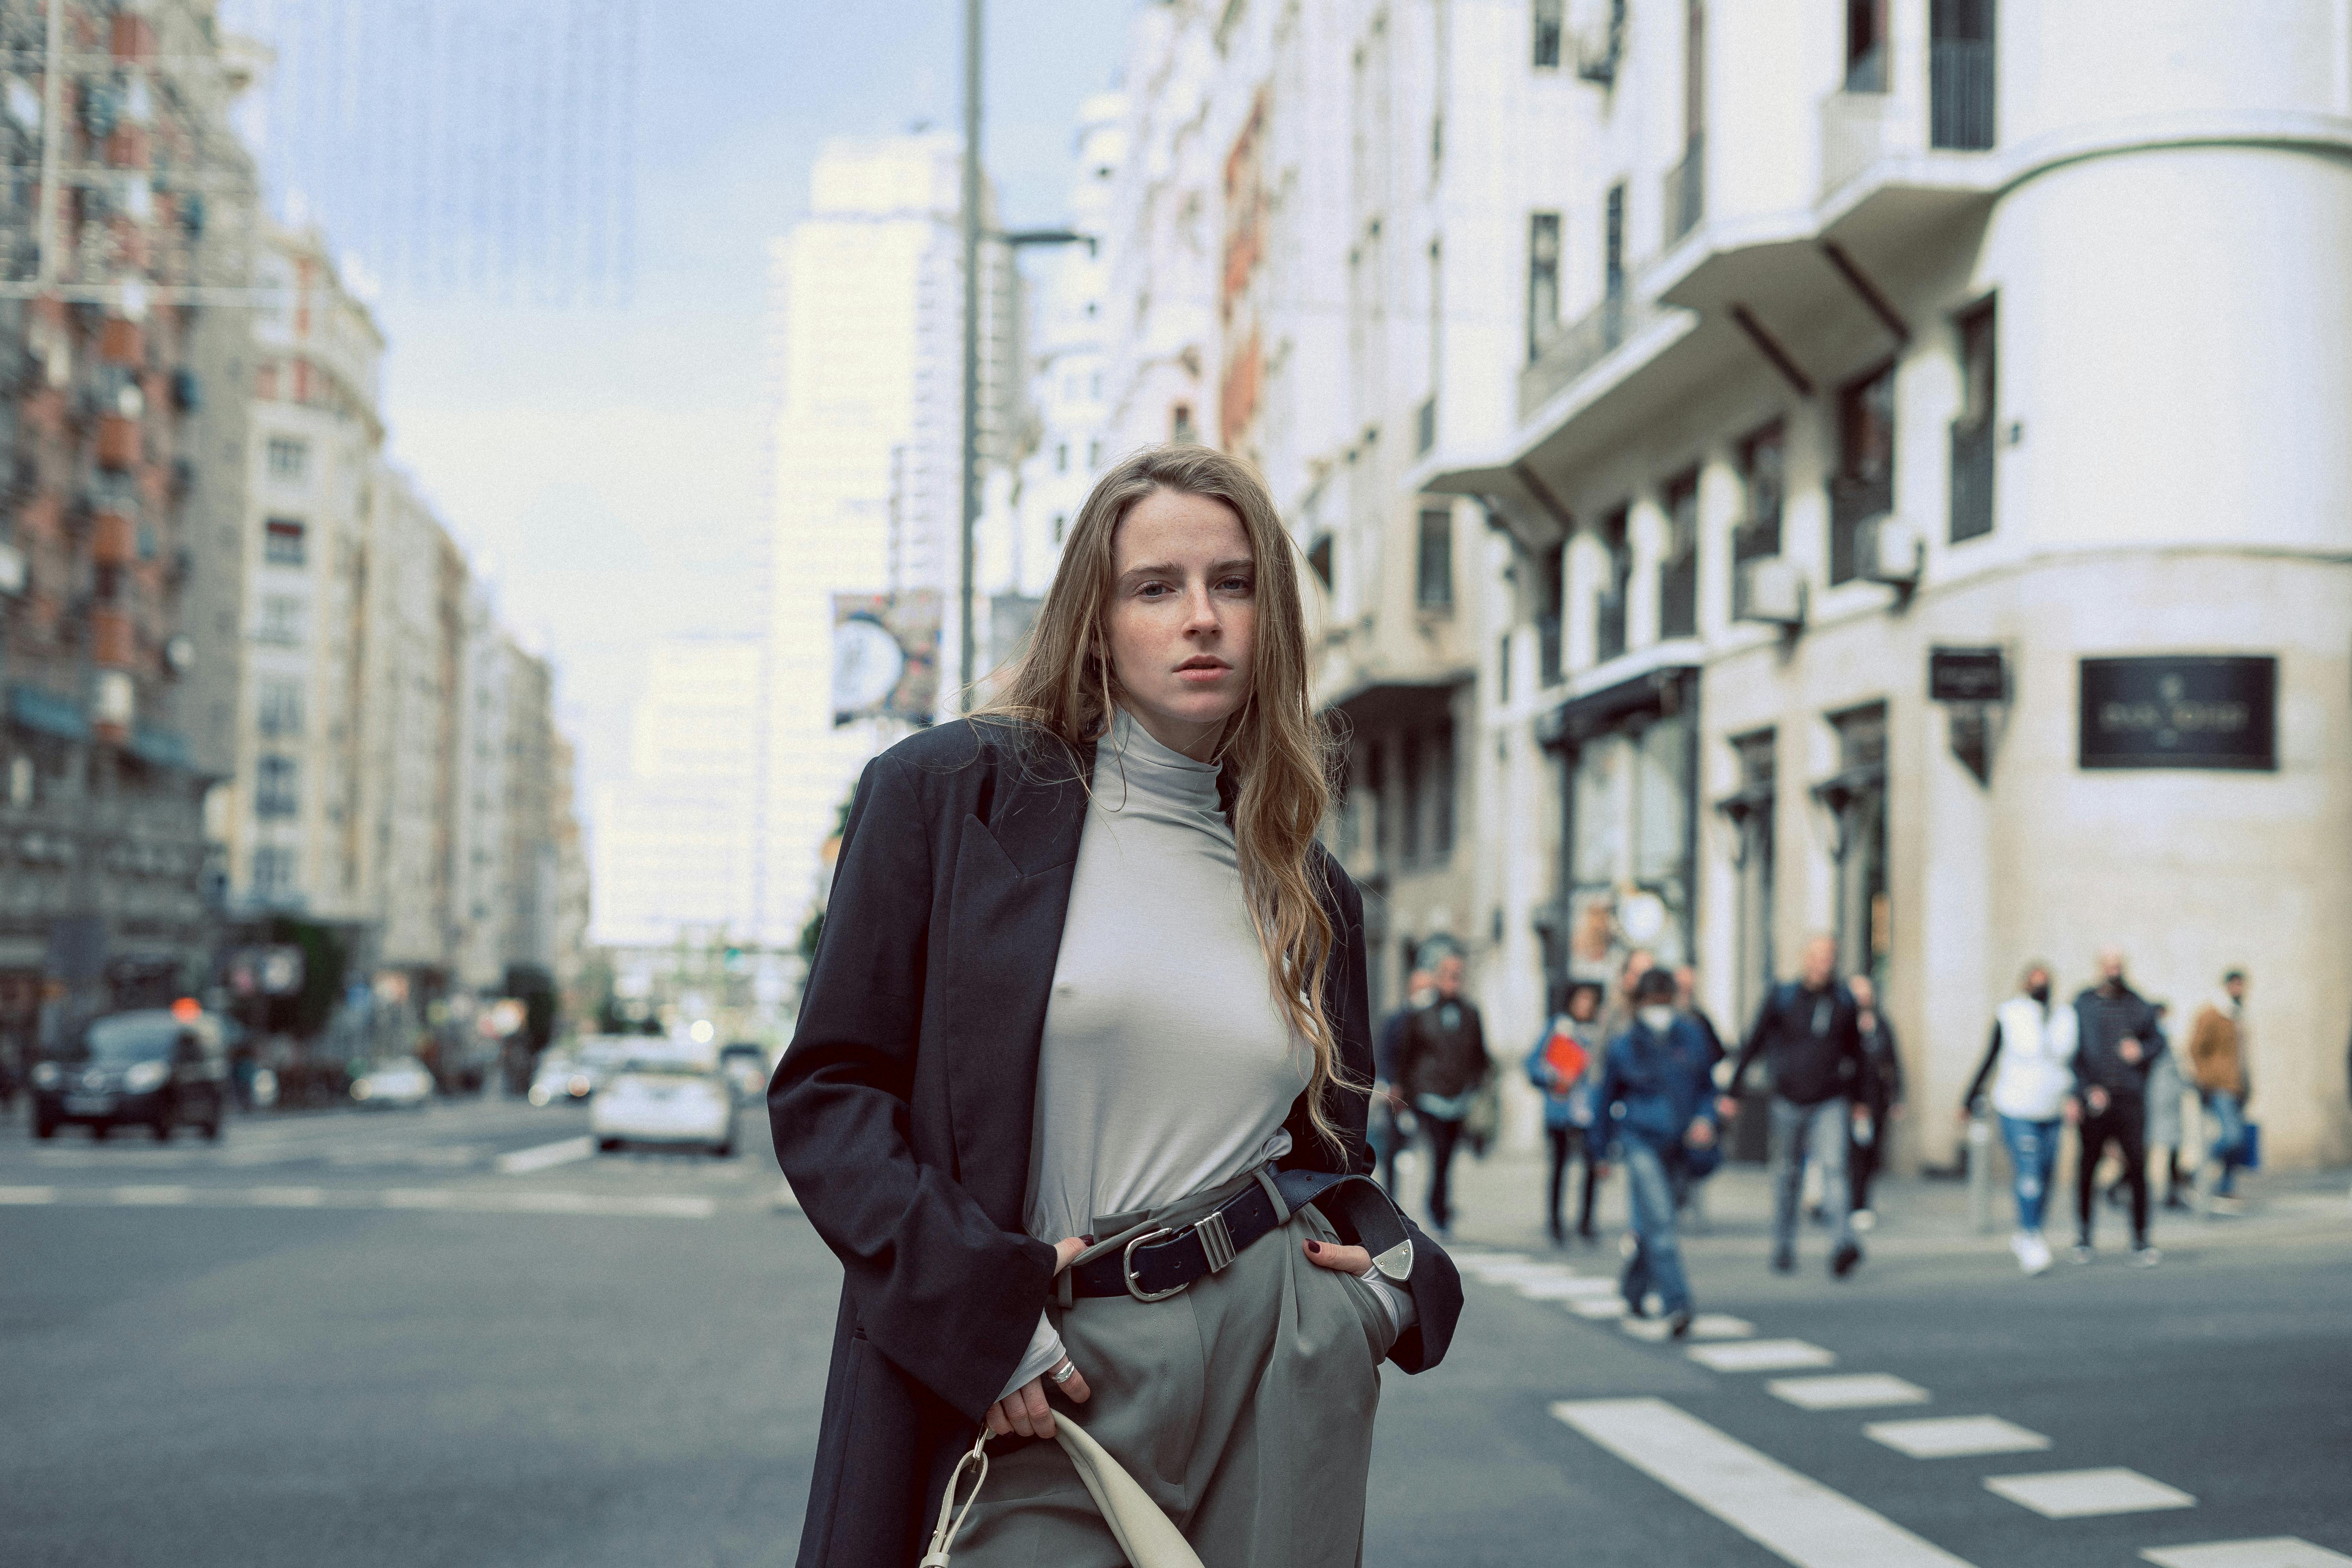 Long Coat Photo by Anna  Shevchuk from Pexels: https://www.pexels.com/photo/young-woman-standing-in-downtown-street-11566654/